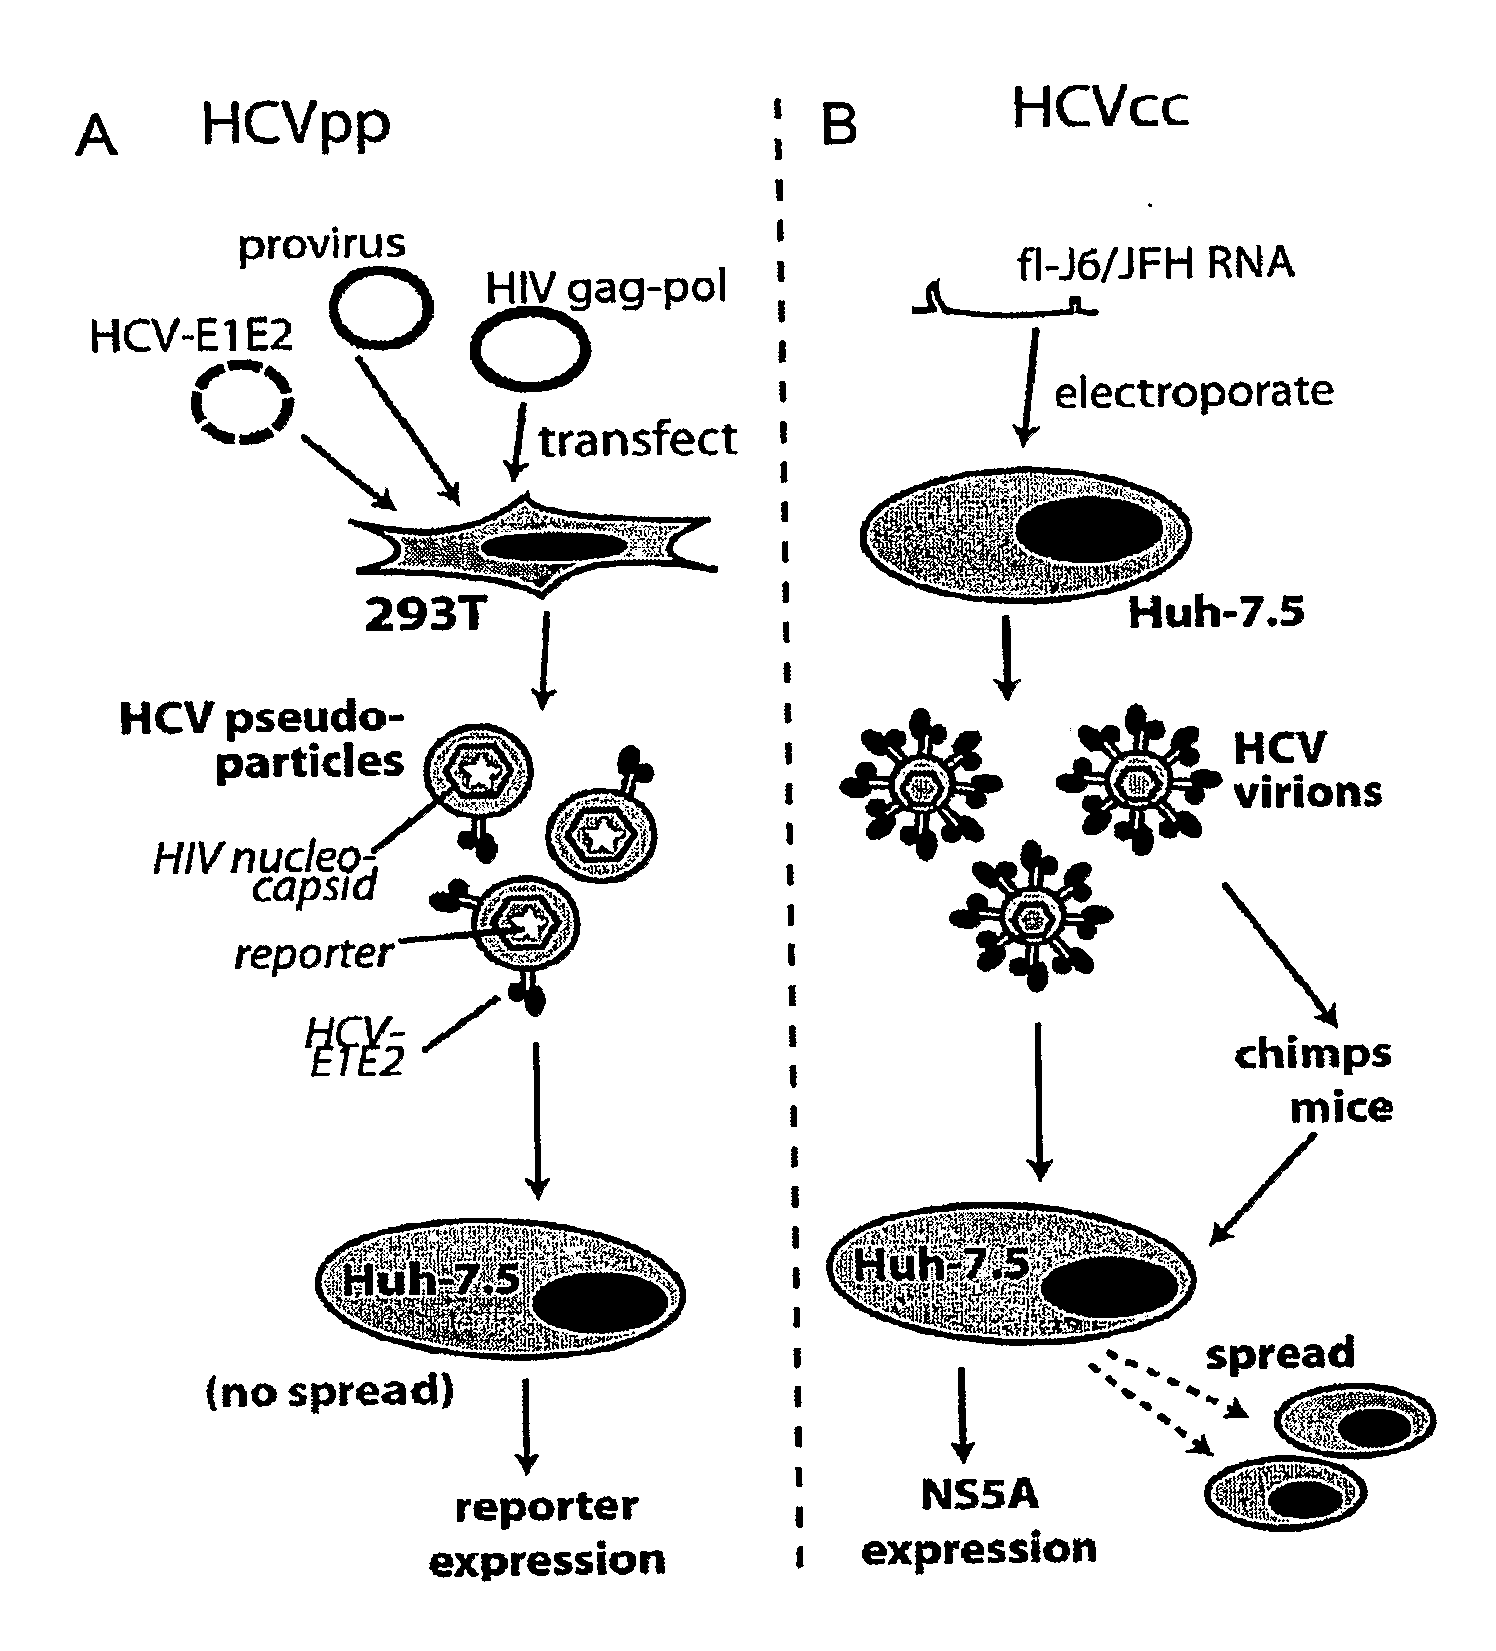 Hcv coreceptor and methods of use thereof